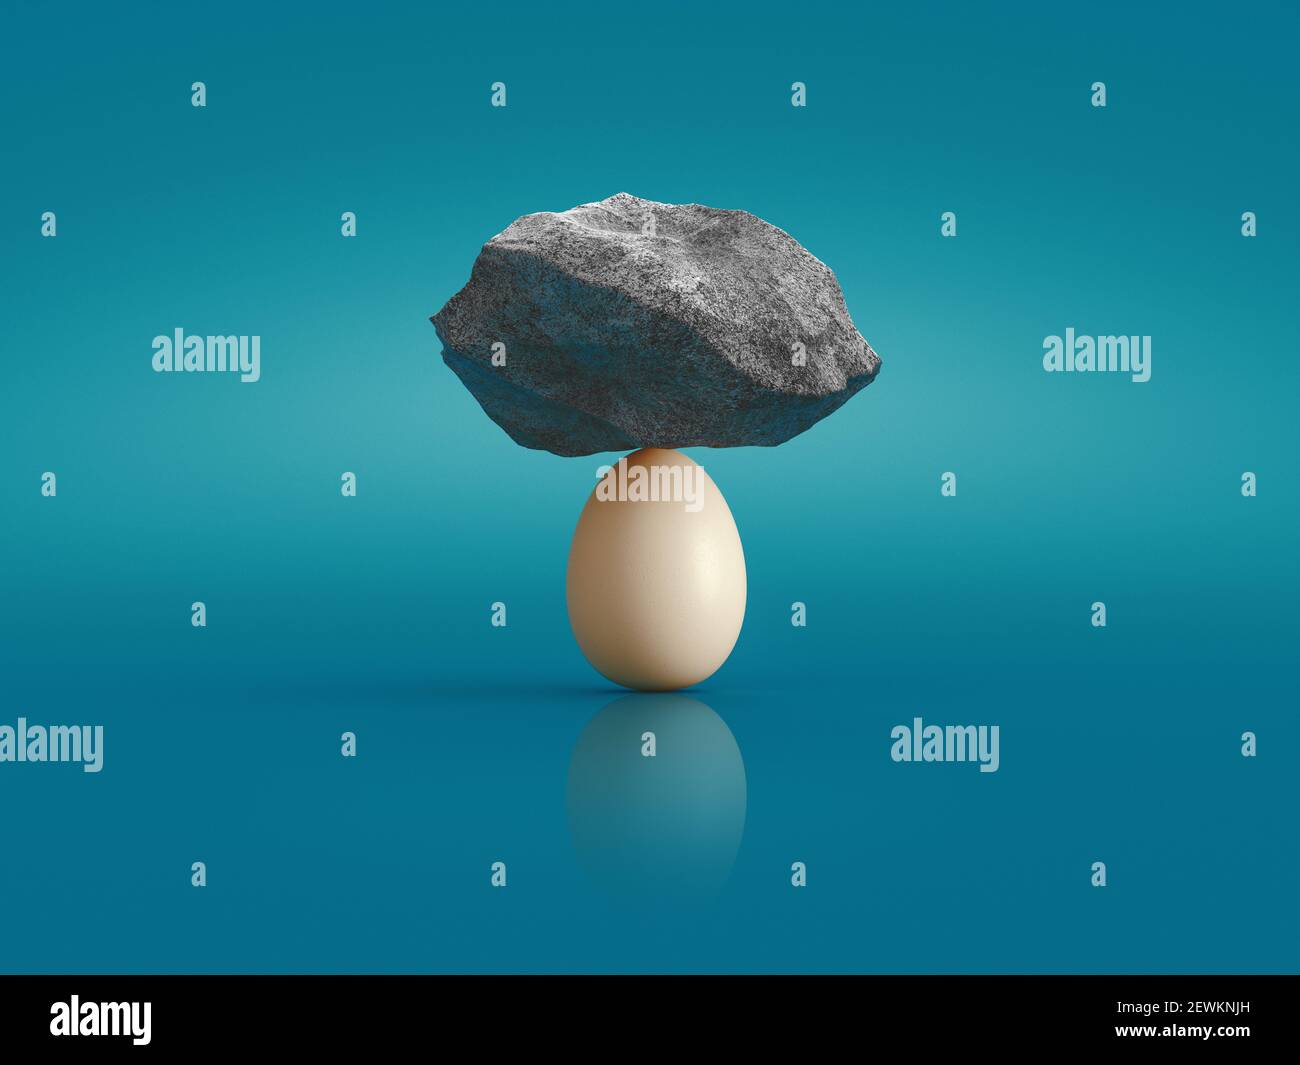 Concept about balance and strength, egg and stones on it. 3d rendering Stock Photo